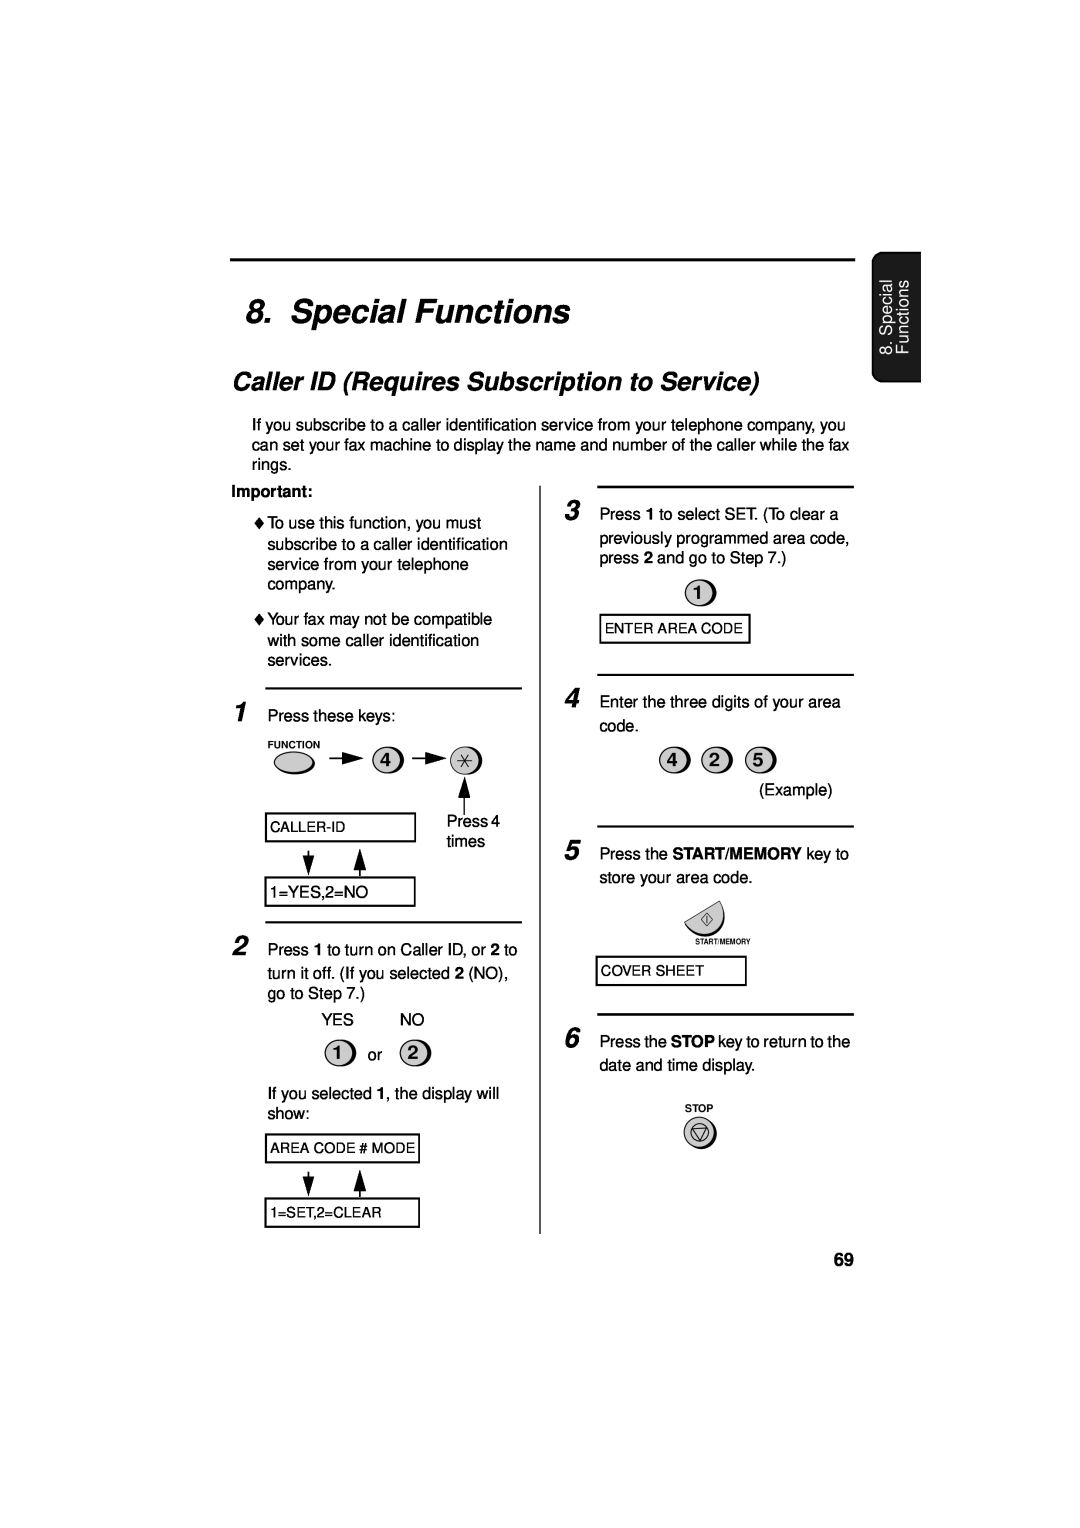 Sharp UX-340LM manual Special Functions, Caller ID Requires Subscription to Service, 1 or 